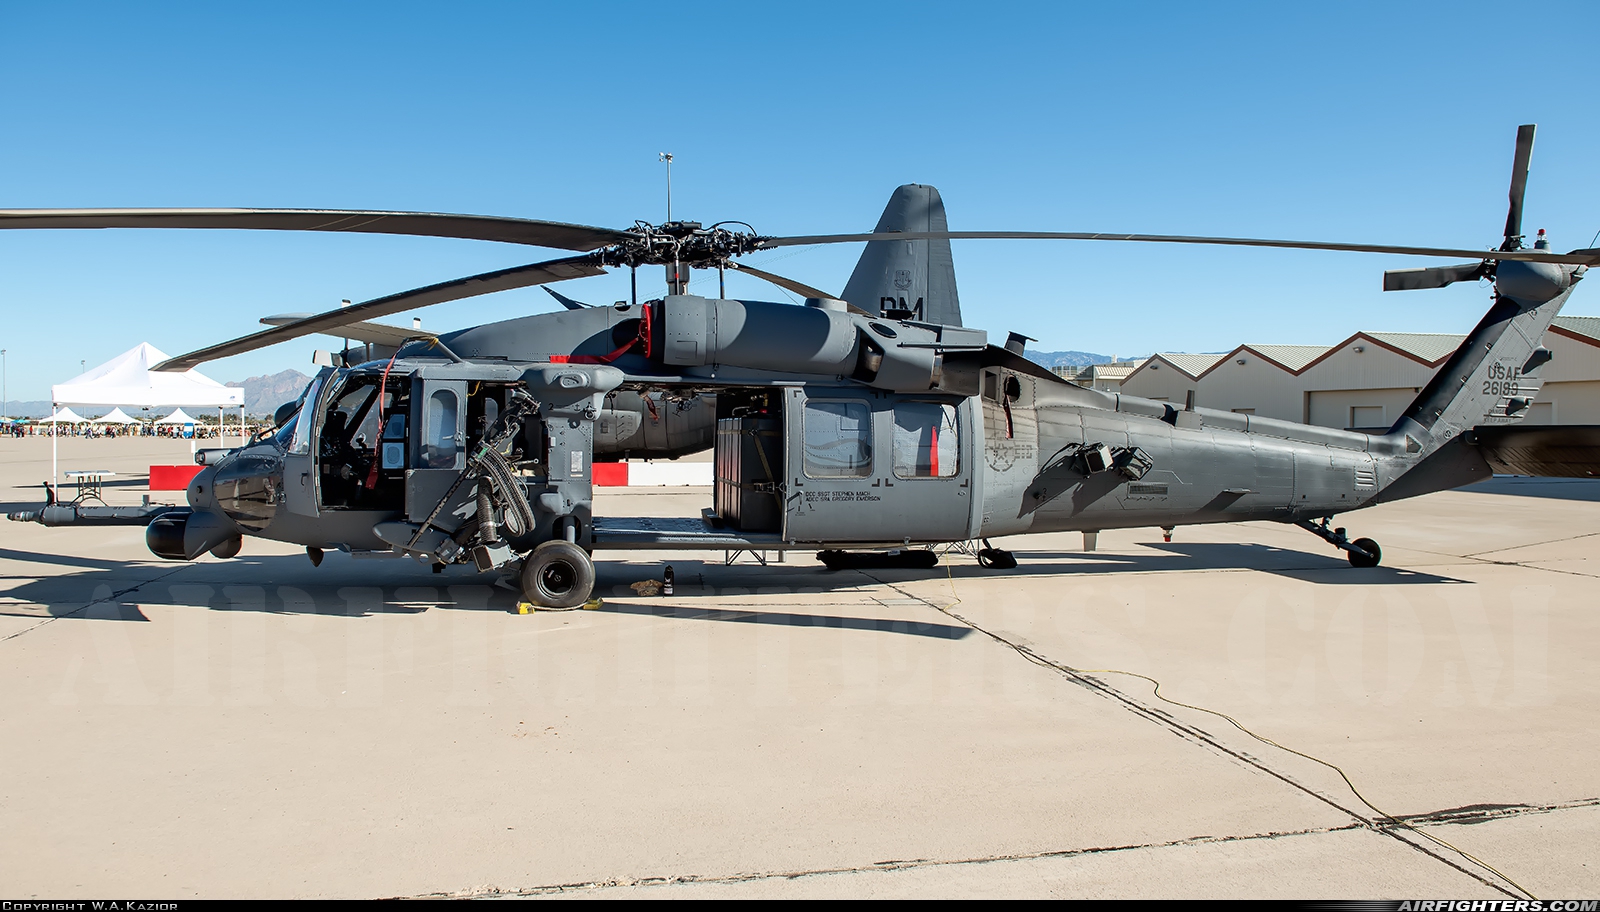 USA - Air Force Sikorsky HH-60G Pave Hawk (S-70A) 89-26199 at Tucson - Davis-Monthan AFB (DMA / KDMA), USA